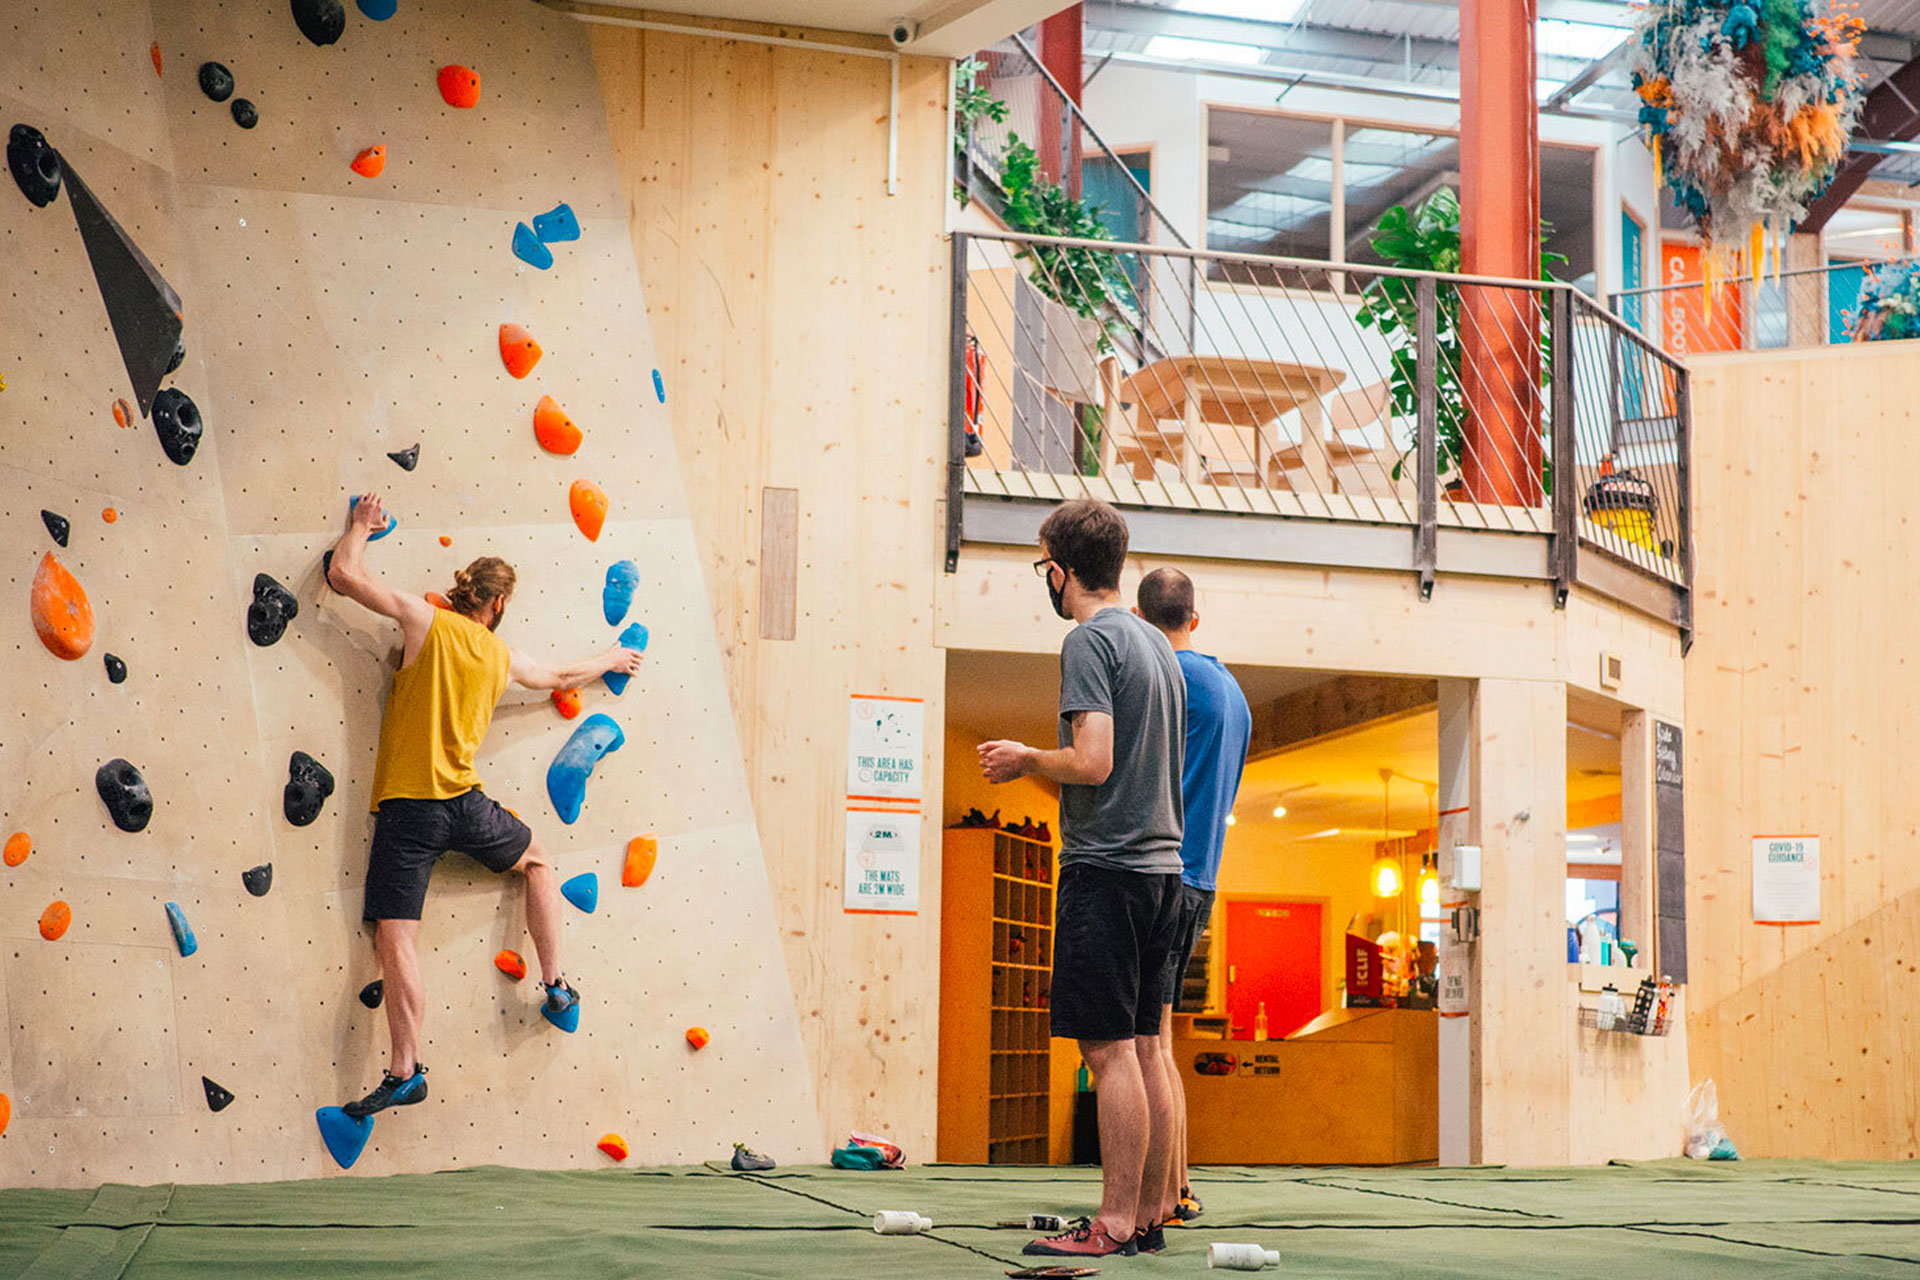 This is Yonder climbing wall